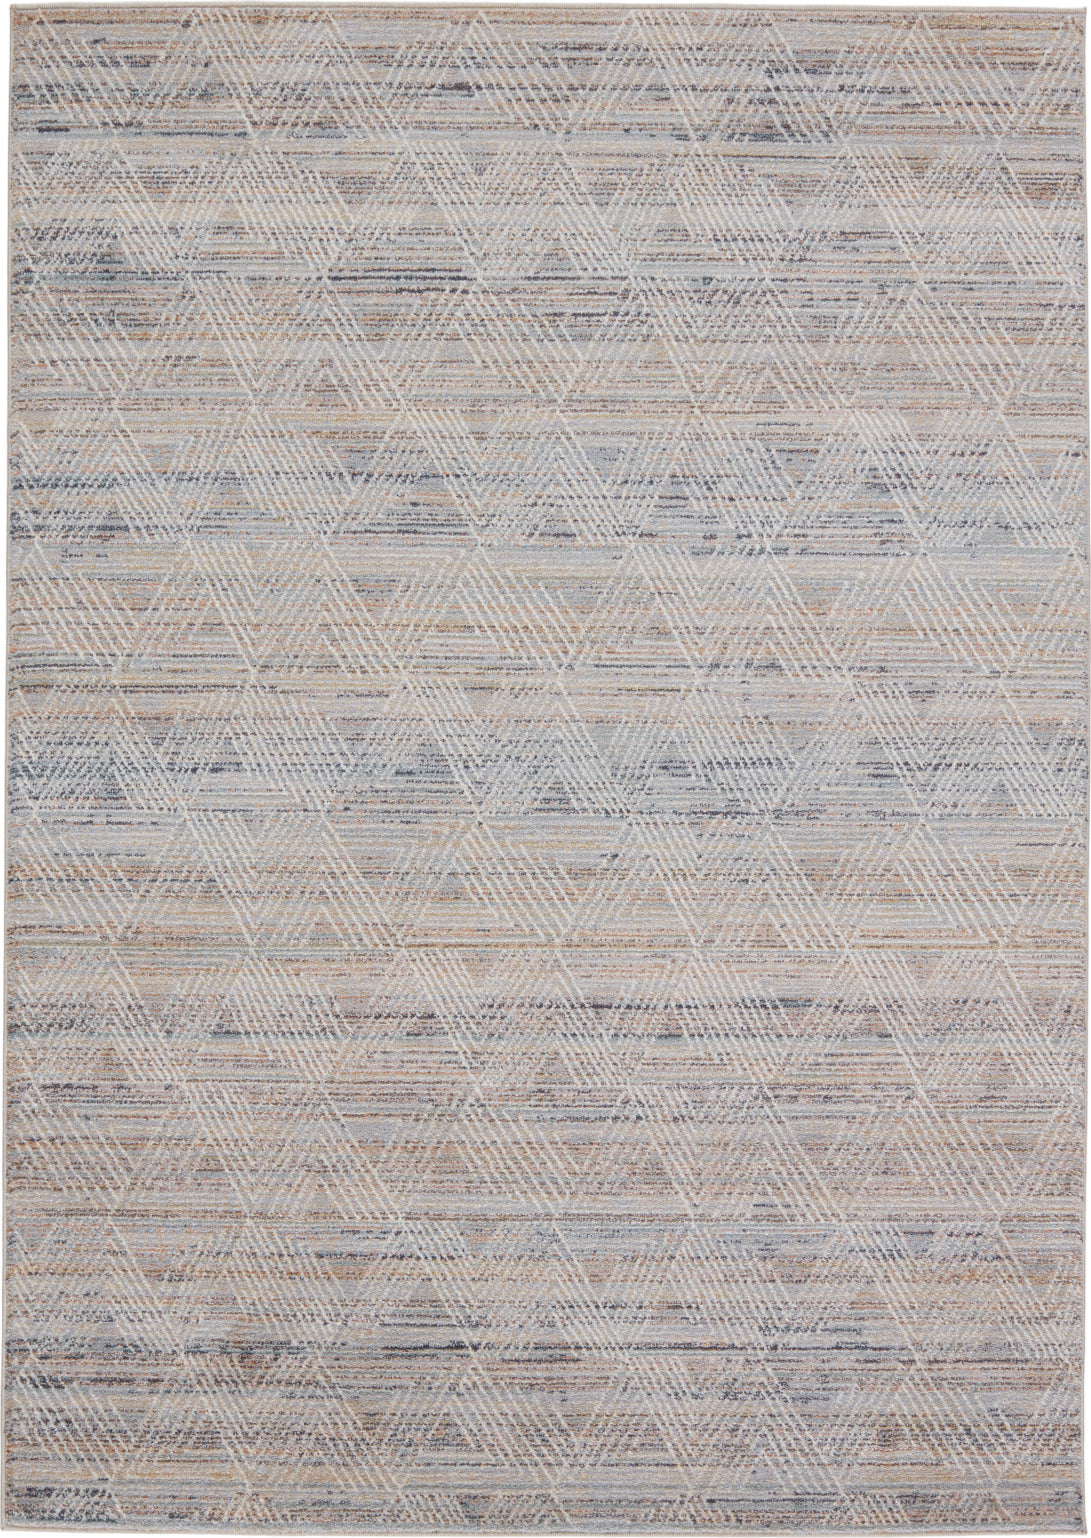 Jaipur Living Abrielle Azelie ABL04 Light Gray/Tan Area Rug by Vibe Main Image